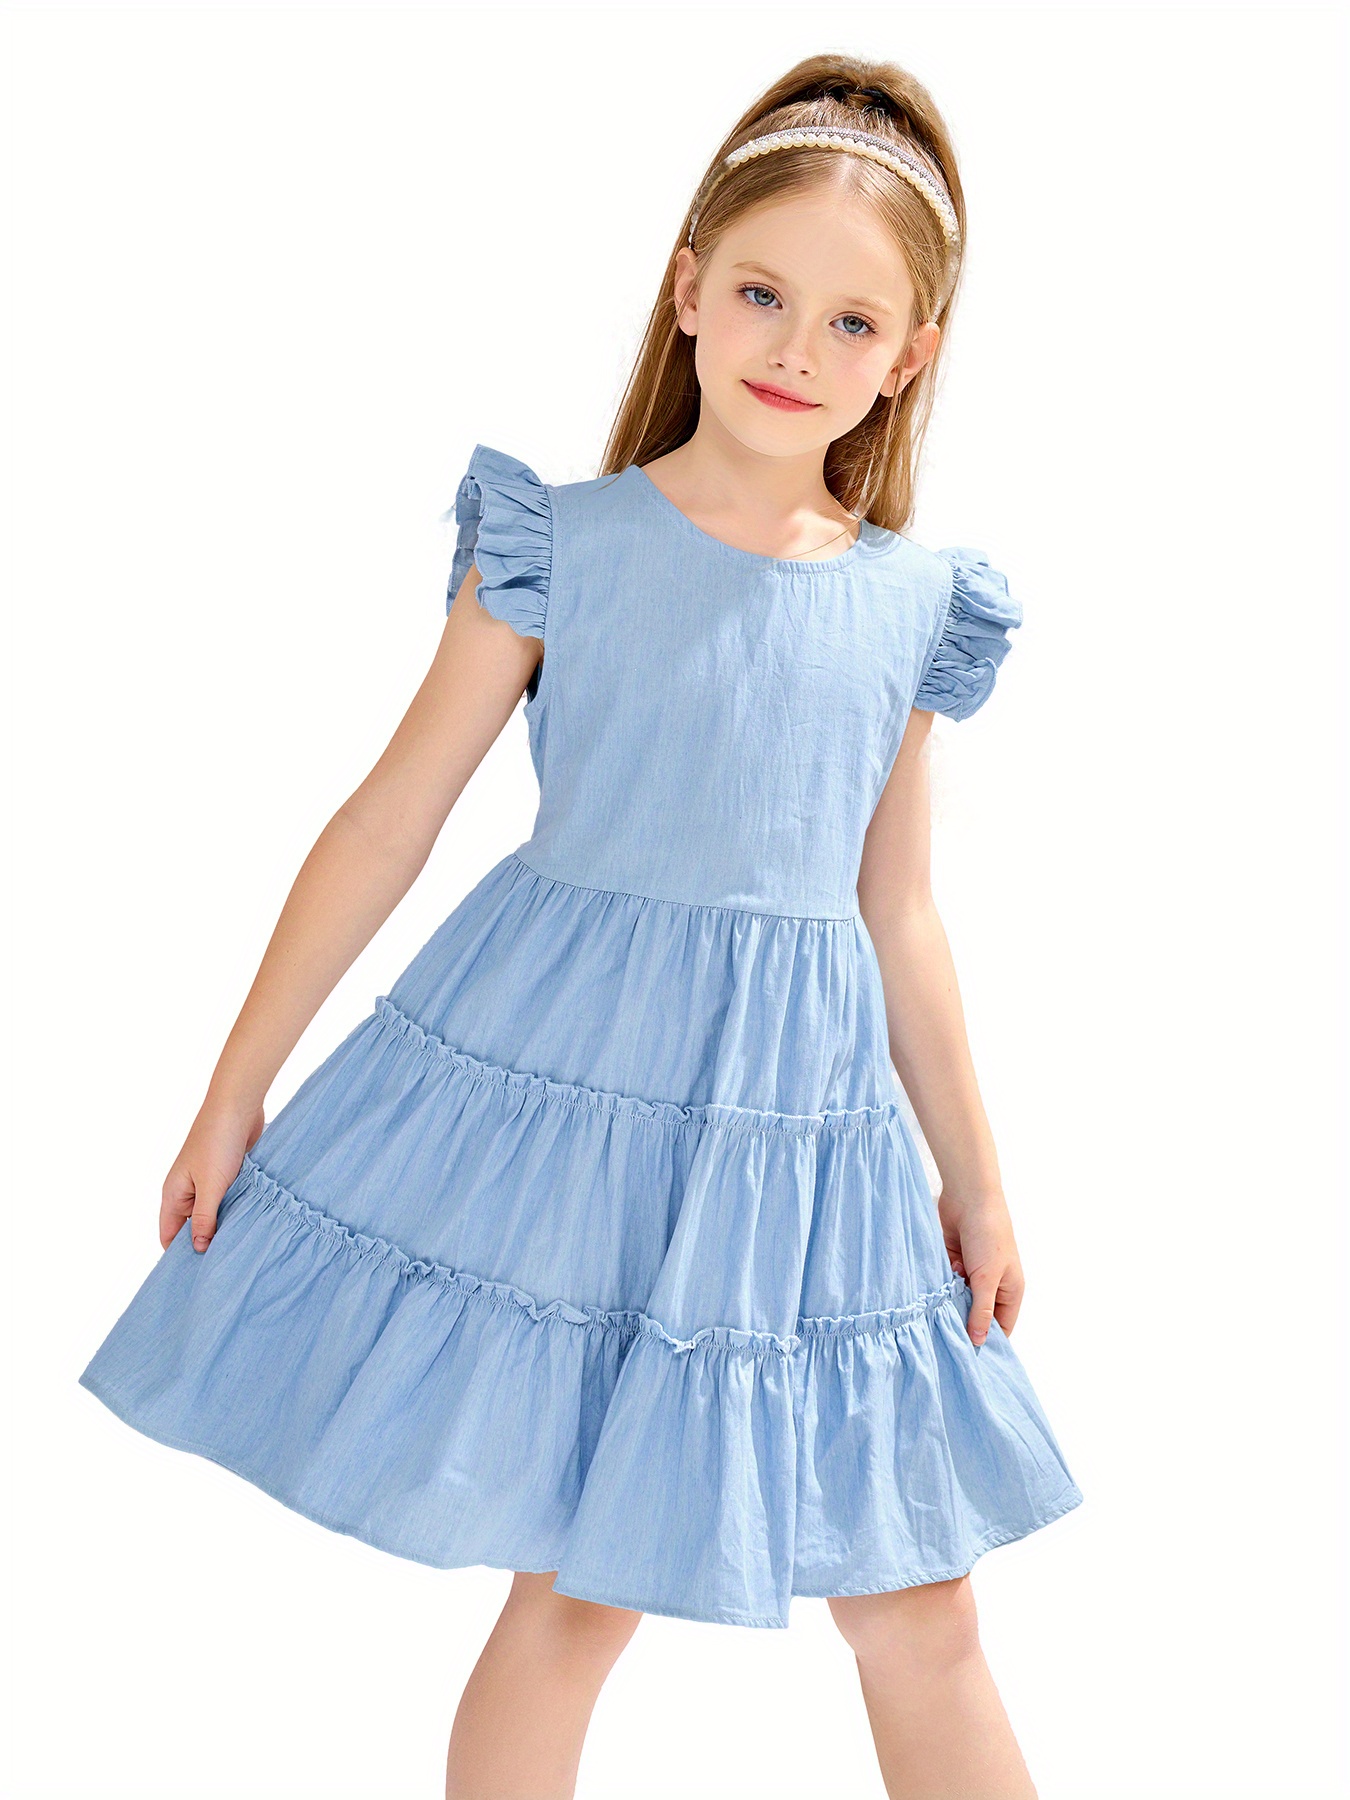 new fashion dresses for girls, new fashion dresses for girls